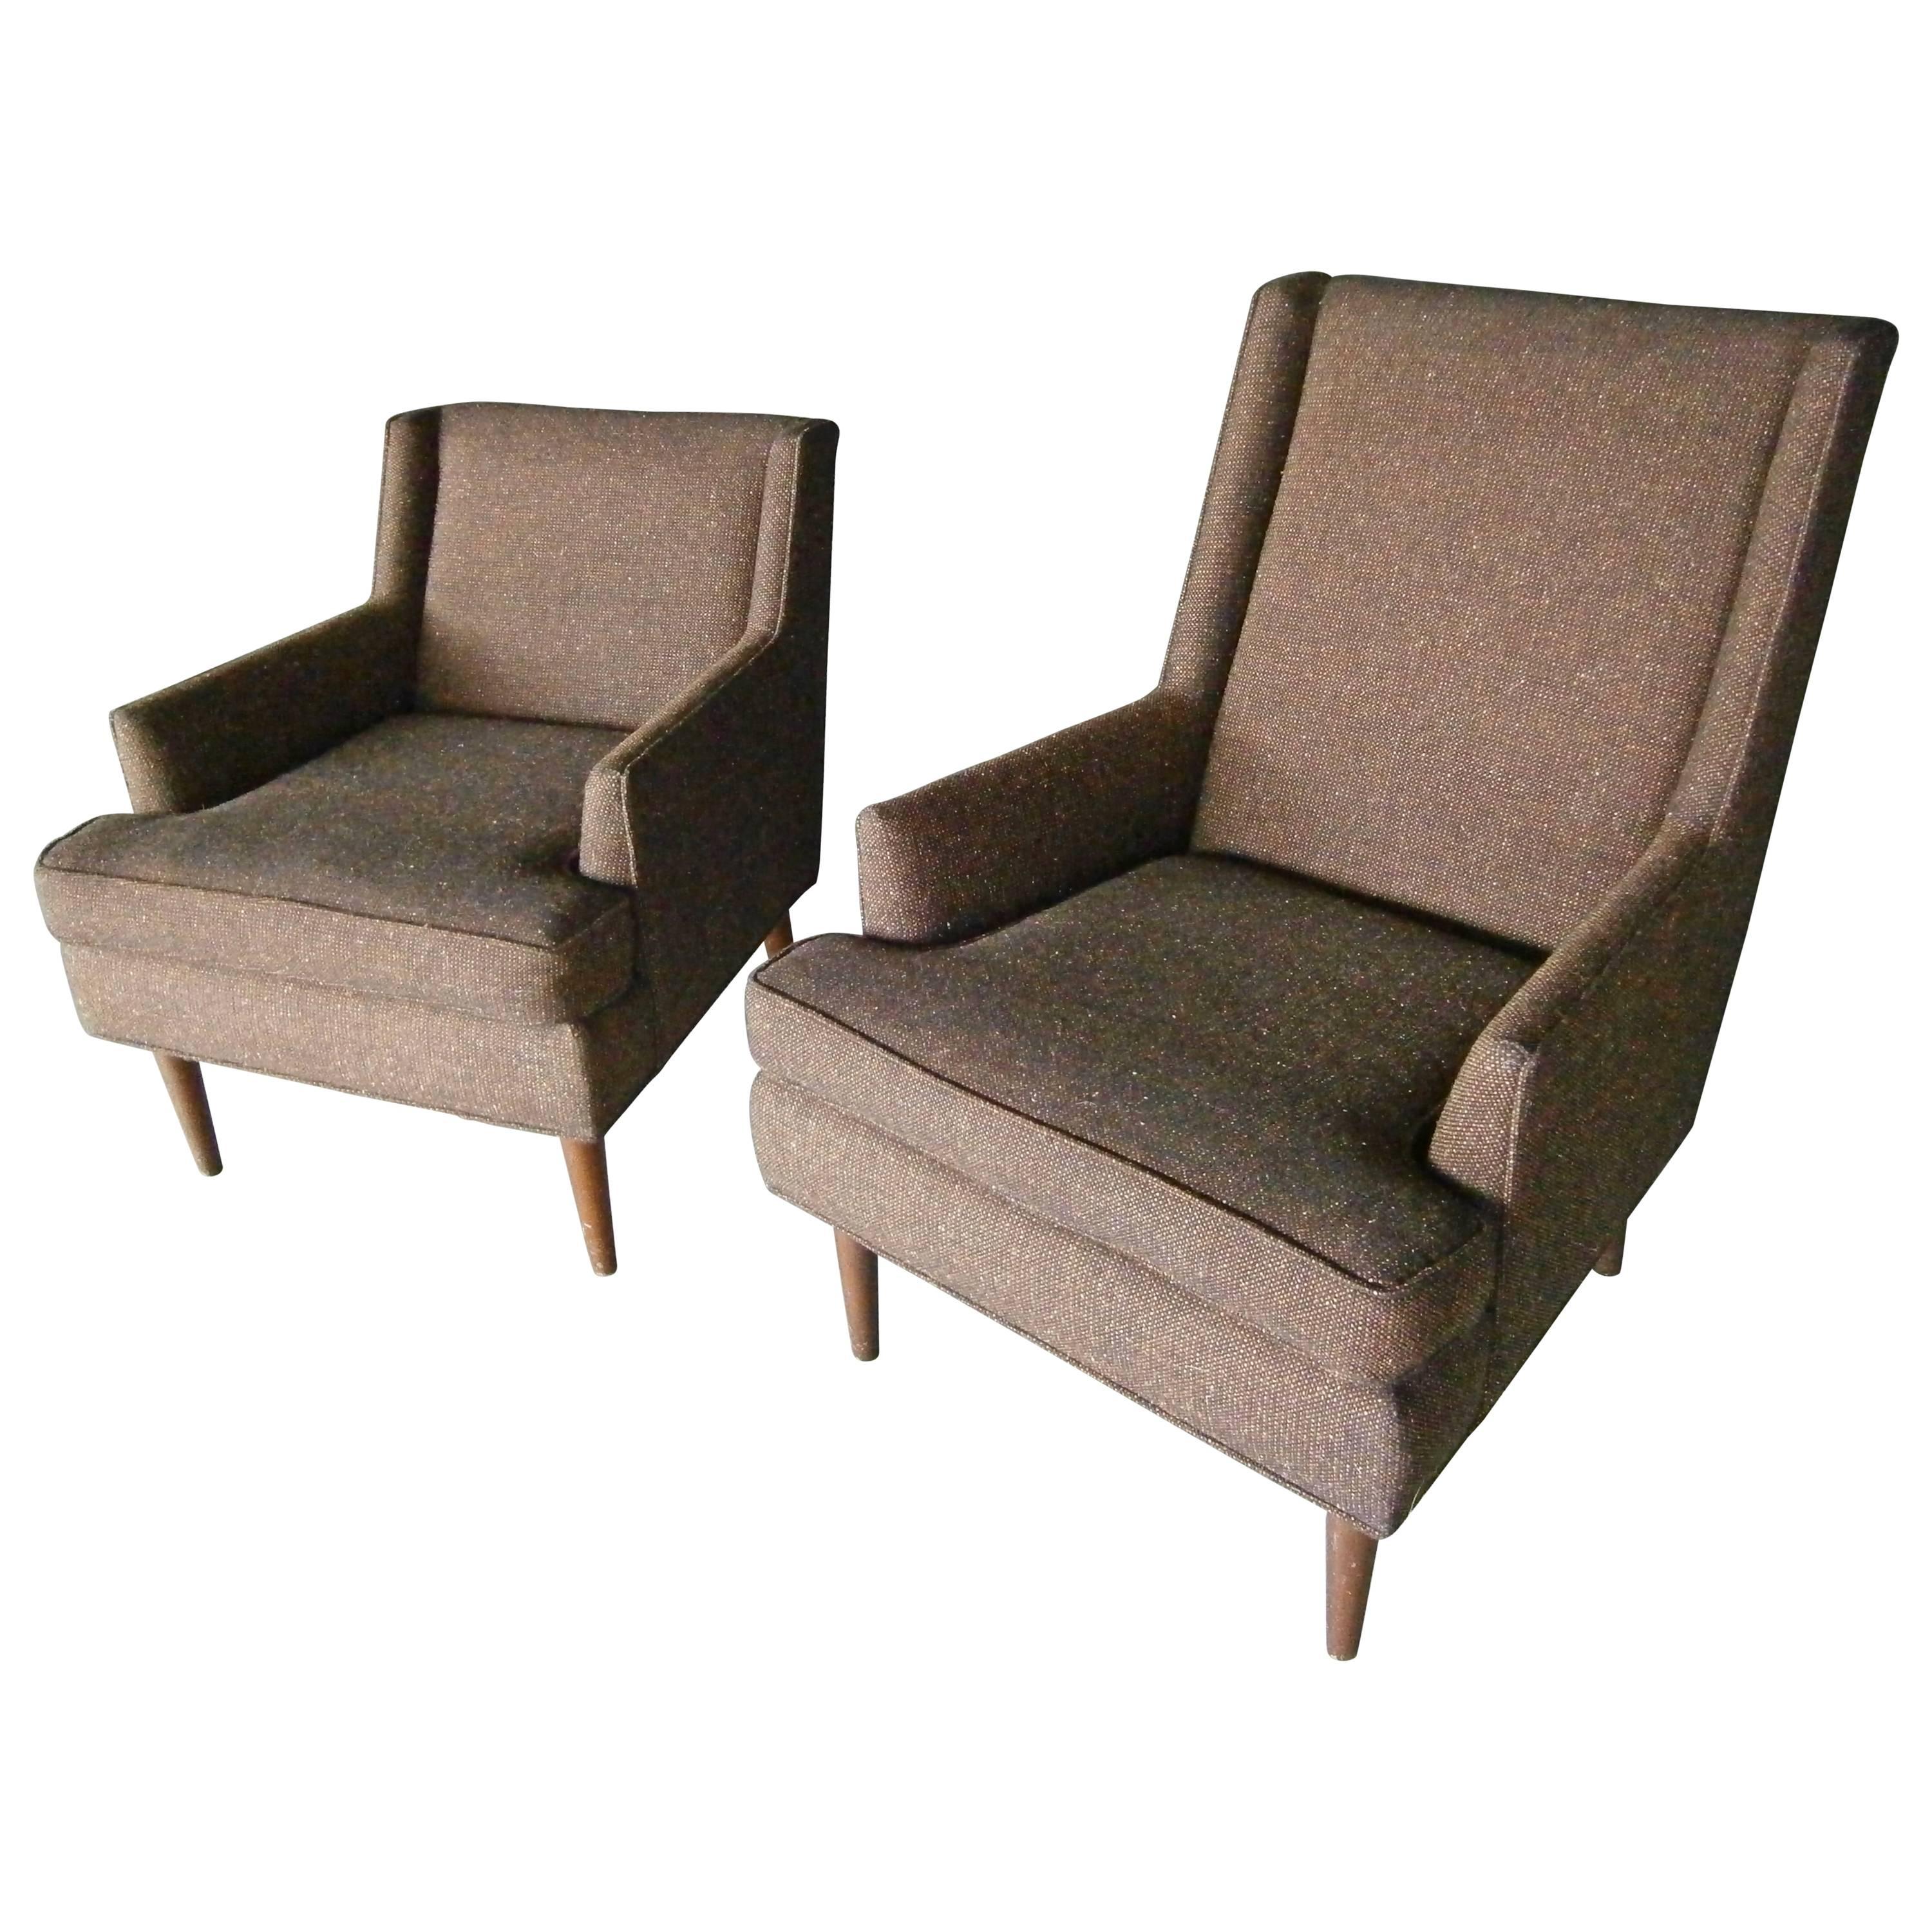 Set of Two Mid Century Modern Fully Upholstered "His & Her" Armchairs  C.1950s For Sale